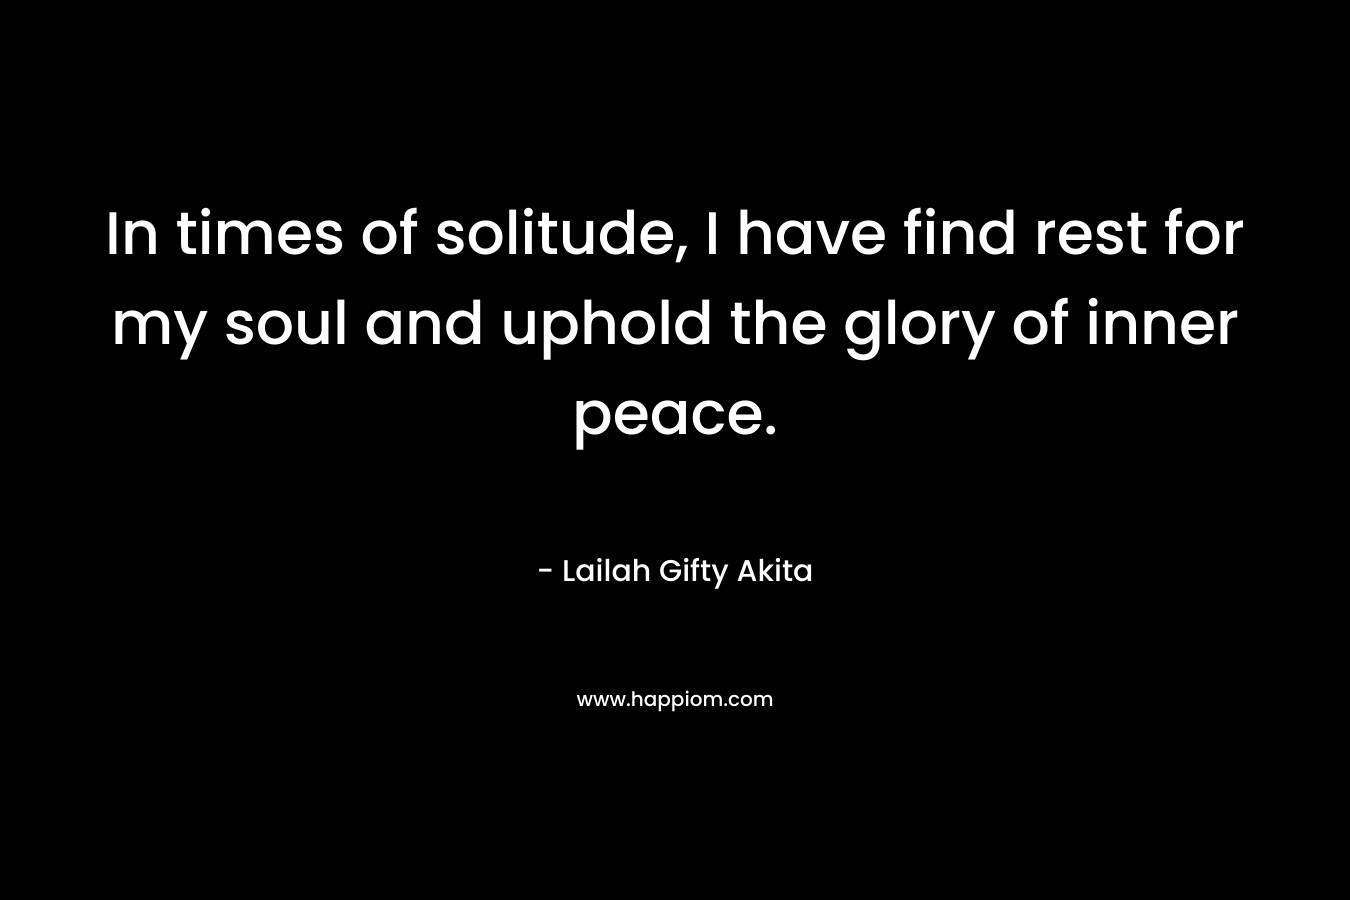 In times of solitude, I have find rest for my soul and uphold the glory of inner peace. – Lailah Gifty Akita